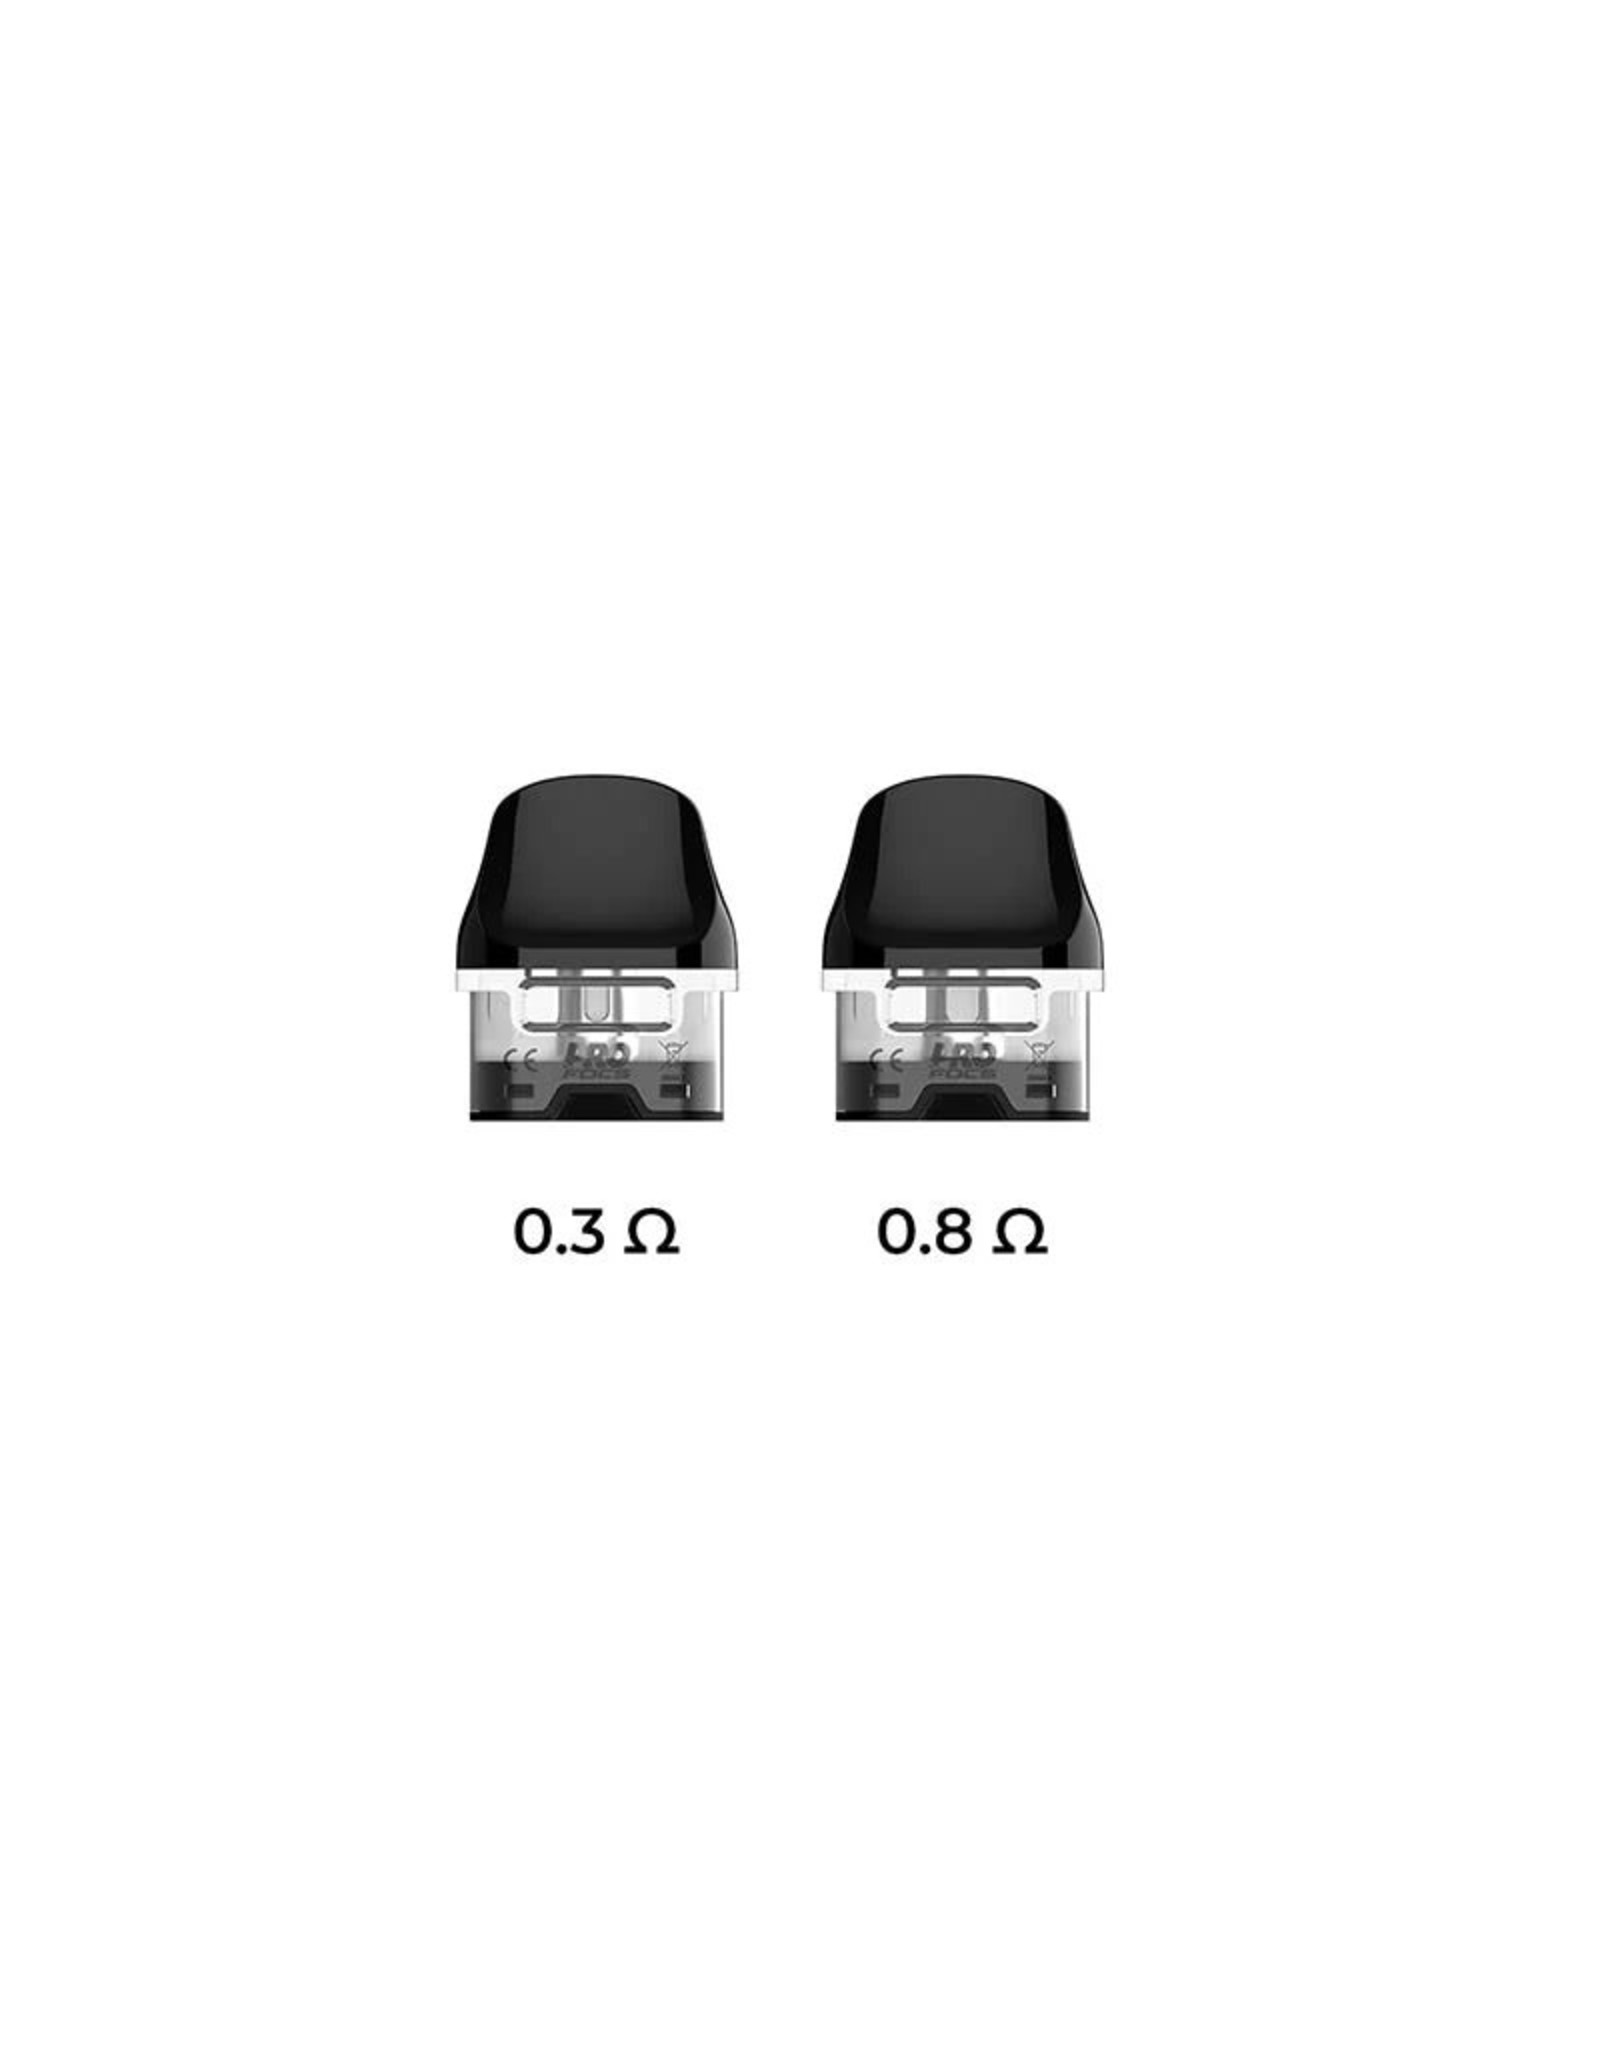 Uwell UWELL CROWN D PODS 0.3 (1PC)